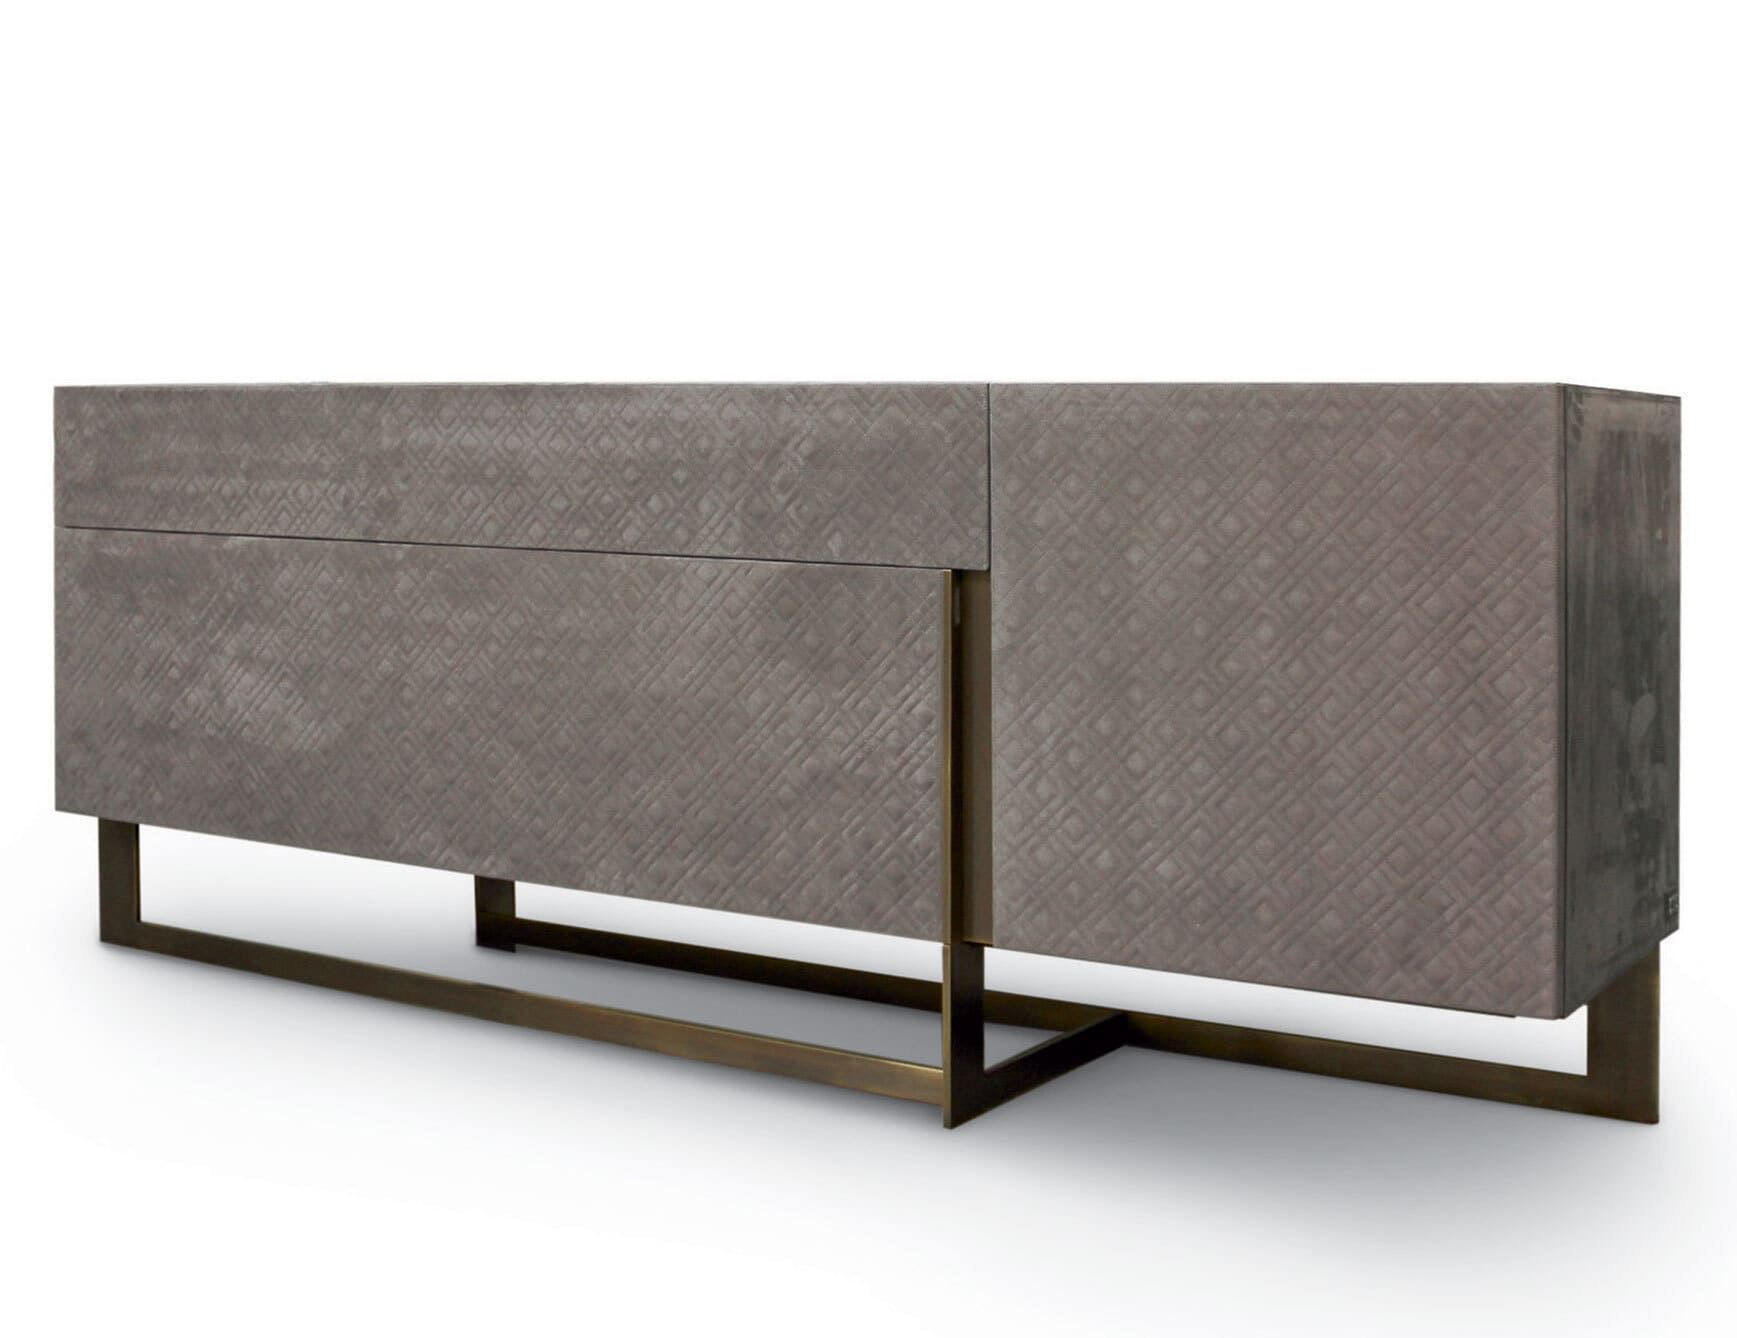 Blade modern luxury credenza with grey leather